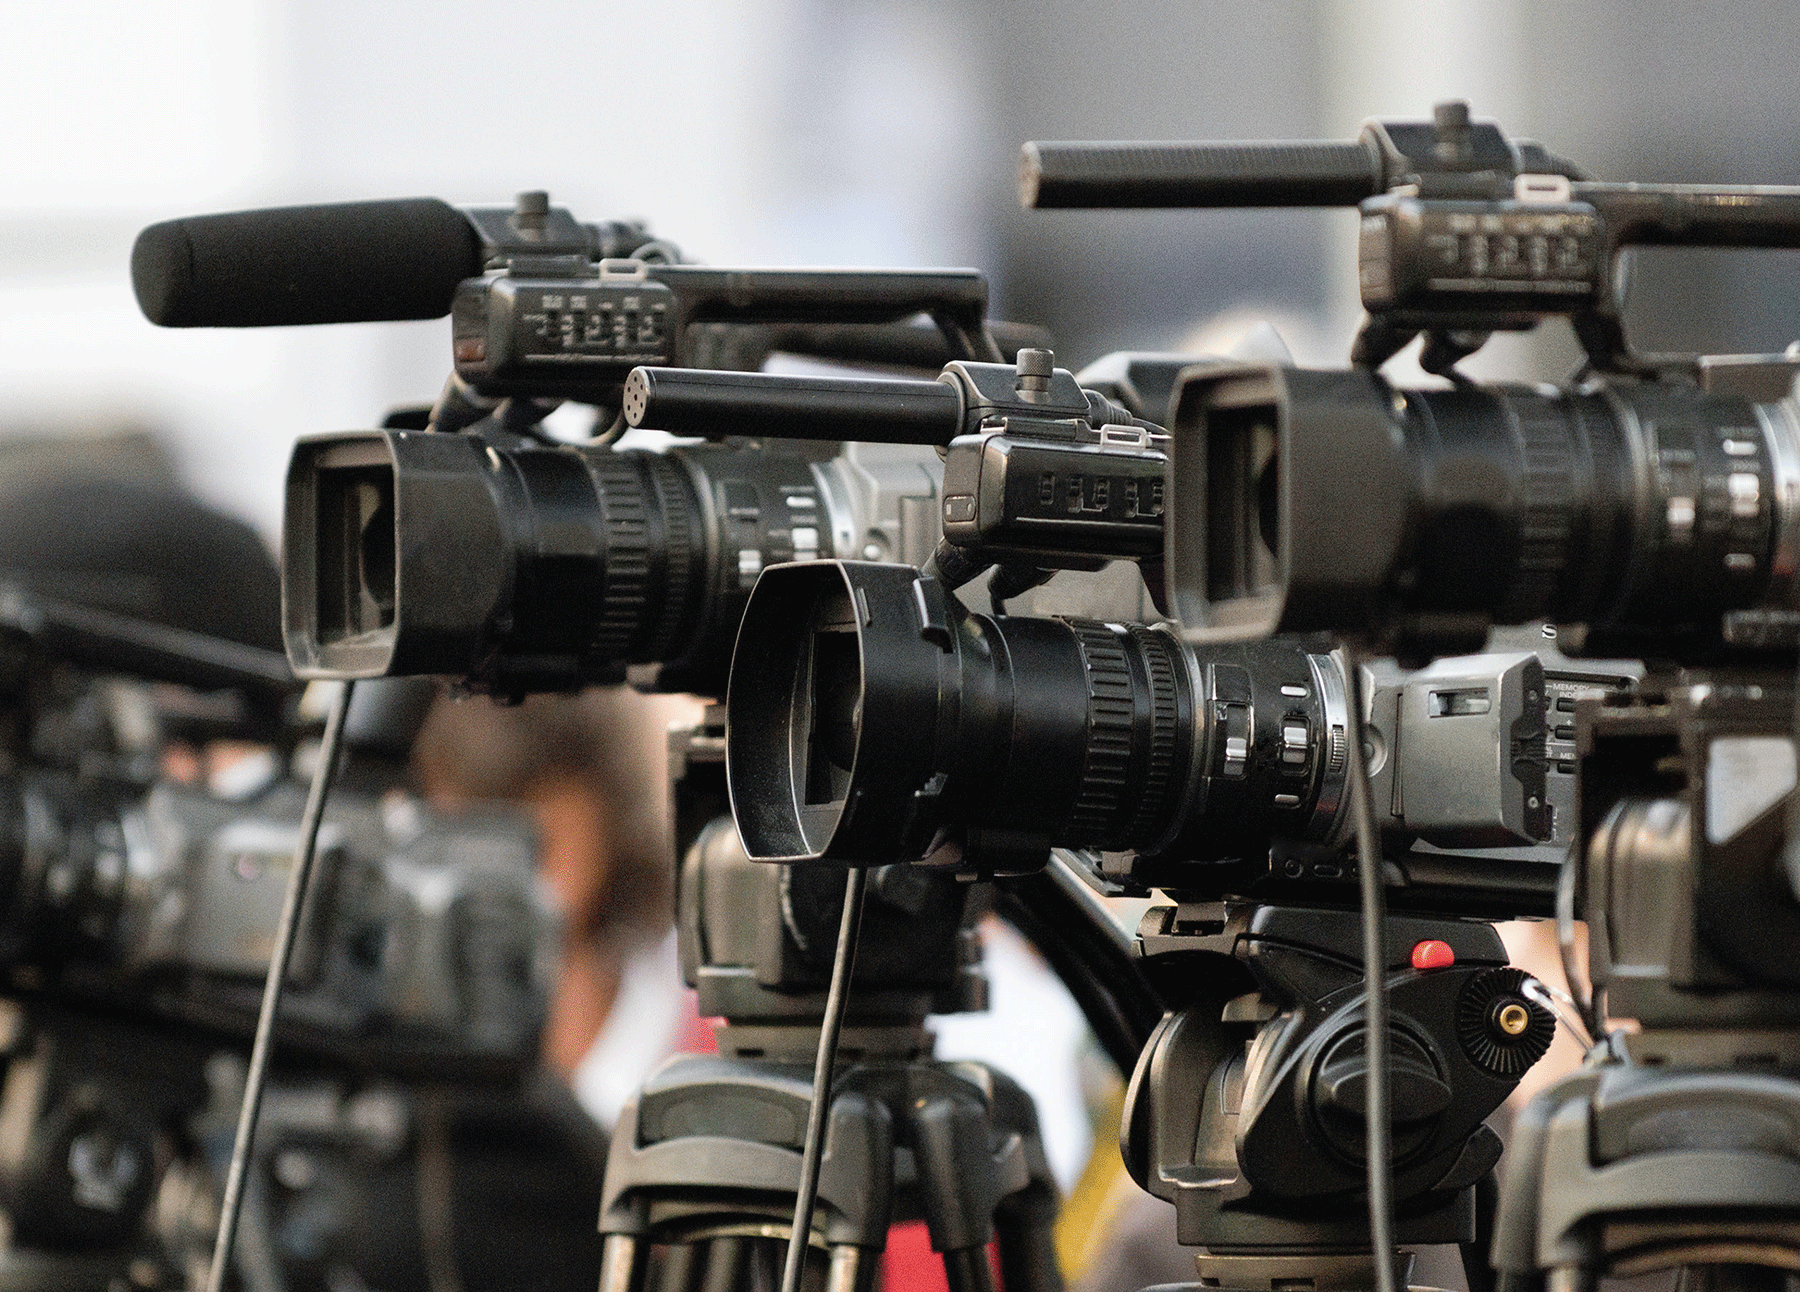 Multiple professional cameras on tripods aiming in the same direction